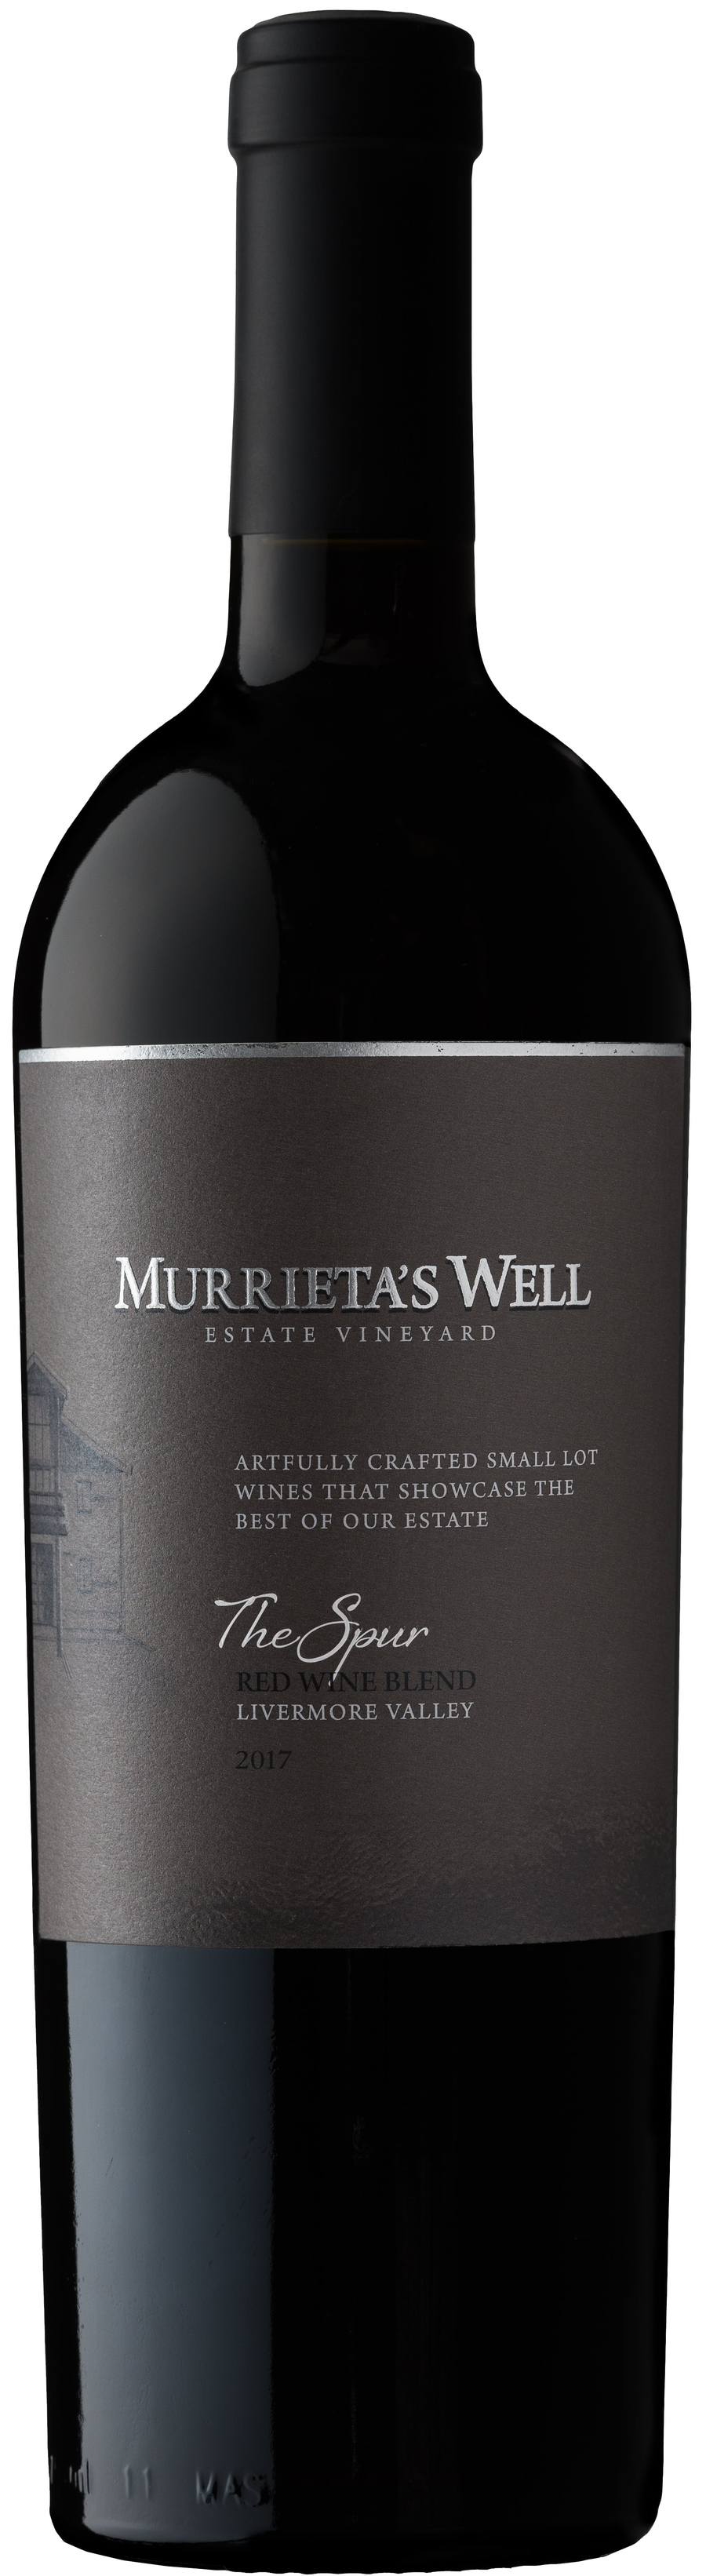 Murrieta'S Well Red Wine Blend The Spur Livermore Valley